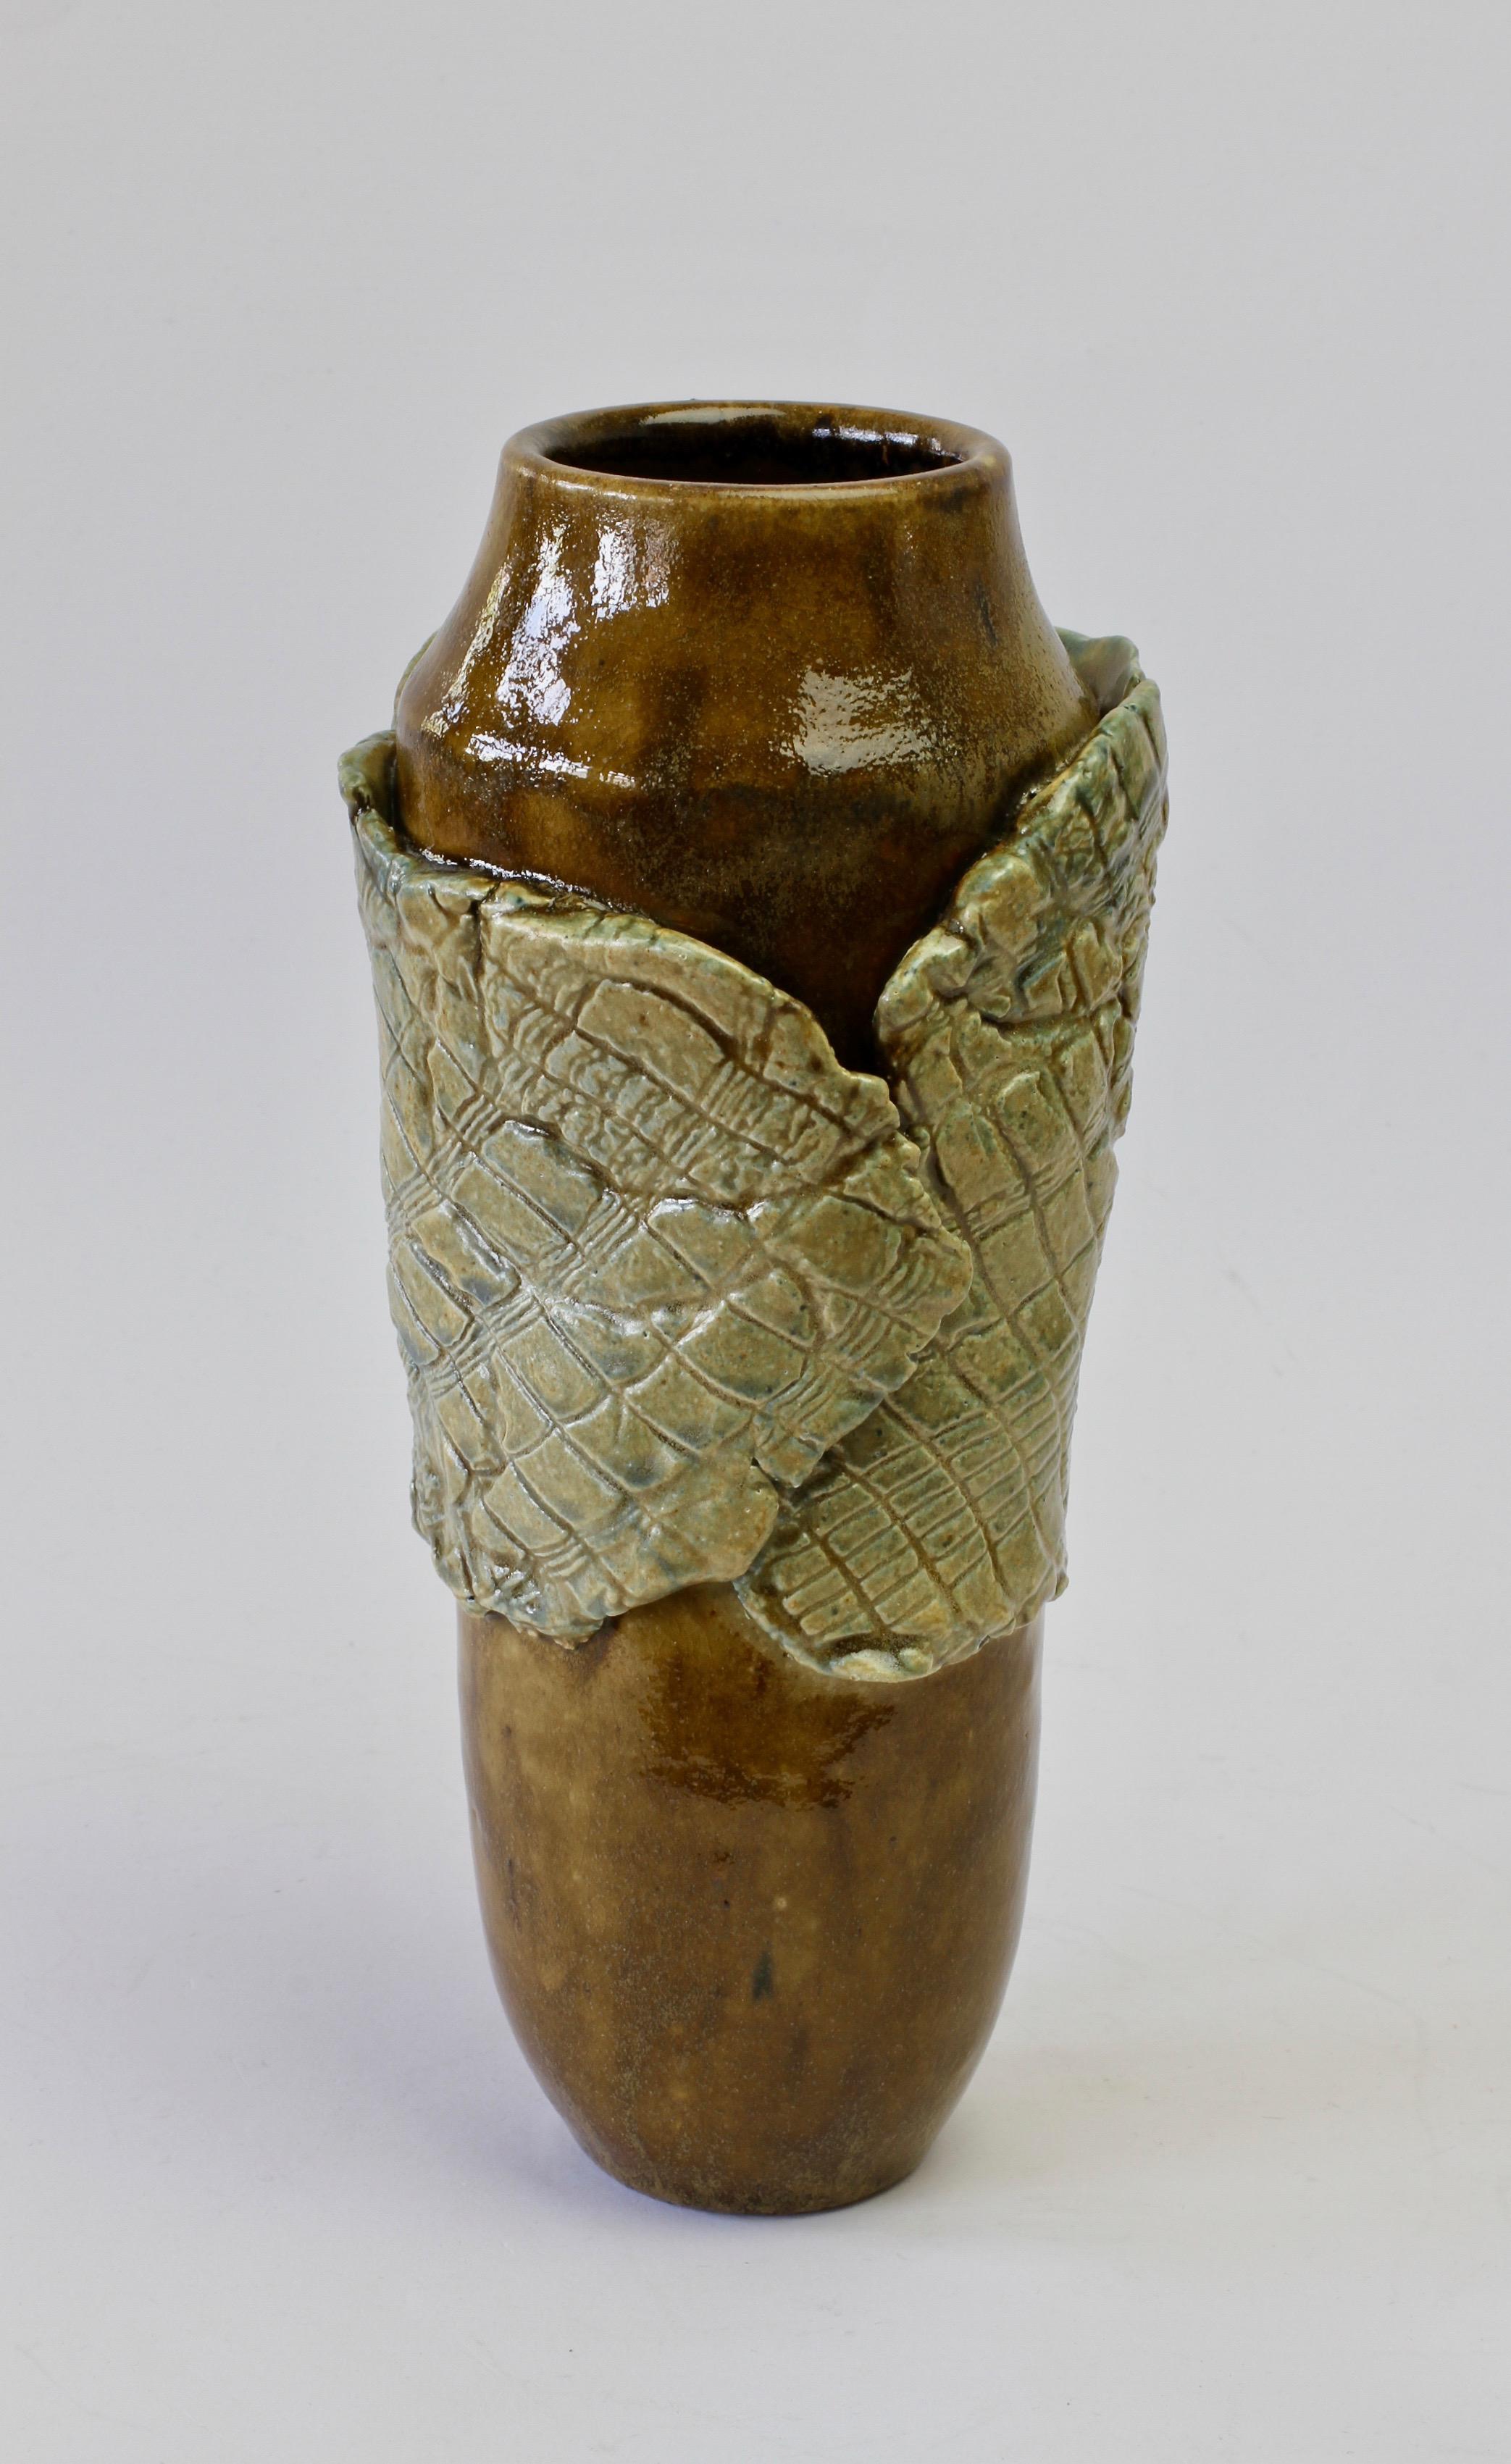 Signed European studio art pottery vase by Signe Pistorious-Lehmann (1925-2012). Beautiful organic form referencing the natural forms of plants with the wood like brown glaze of the vase which is enveloped in what feels very much like a large green